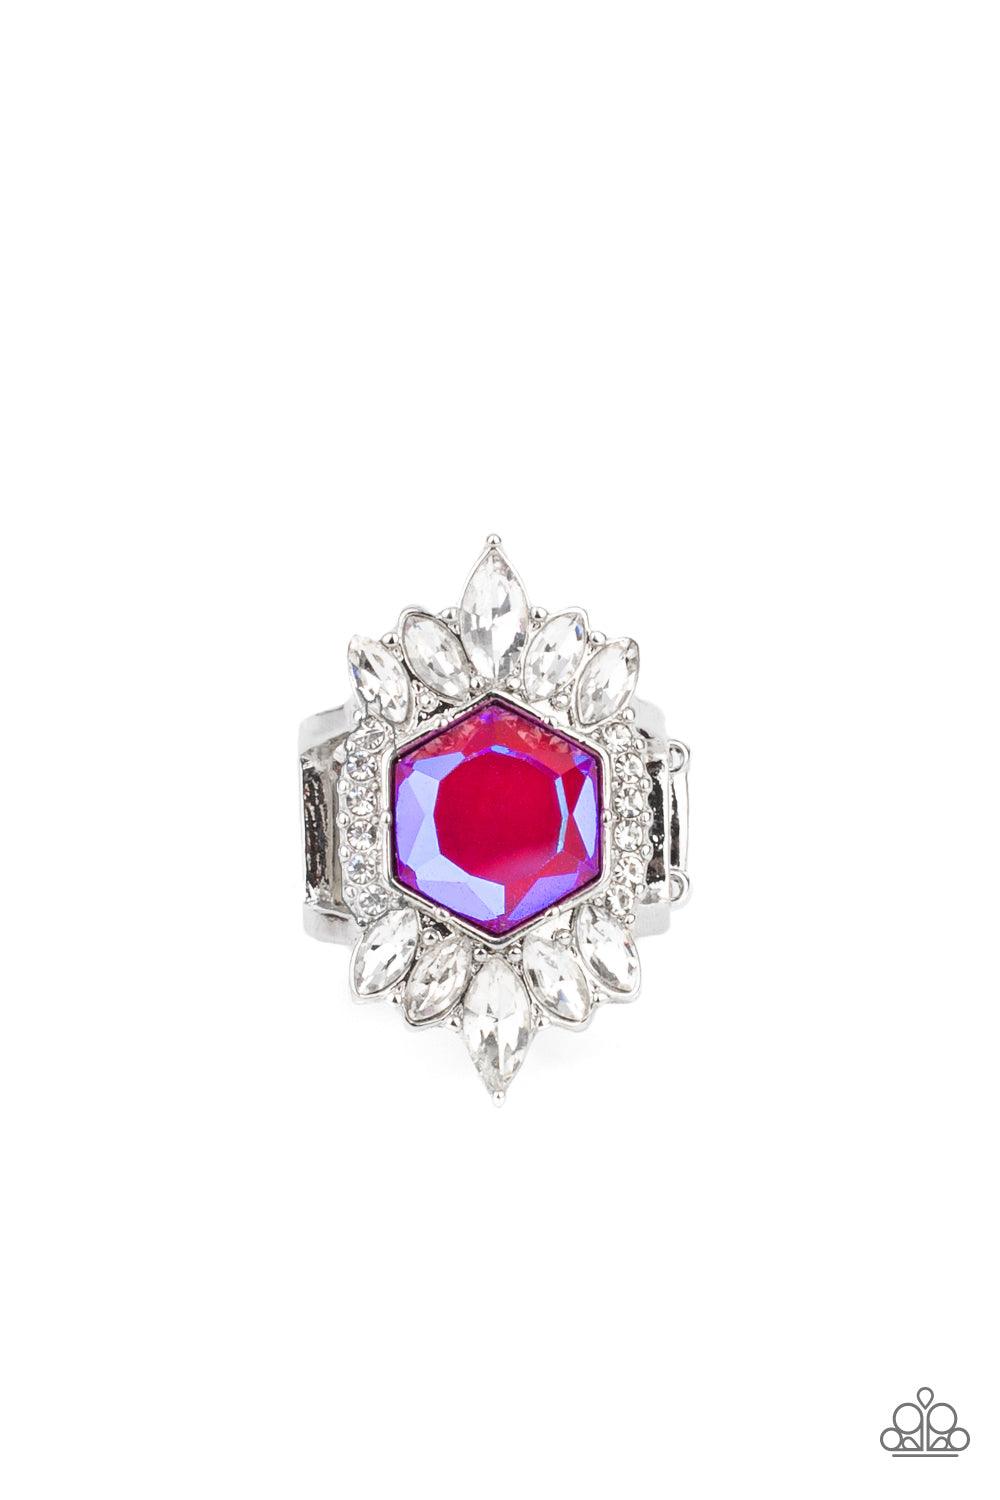 Paparazzi Accessories Divine Intervention - Pink Featuring a radiant UV shimmer, a hexagonal pink rhinestone is pressed into the center of round and marquise cut white rhinestones that dramatically coalesce into an out-of-this-world centerpiece atop the f